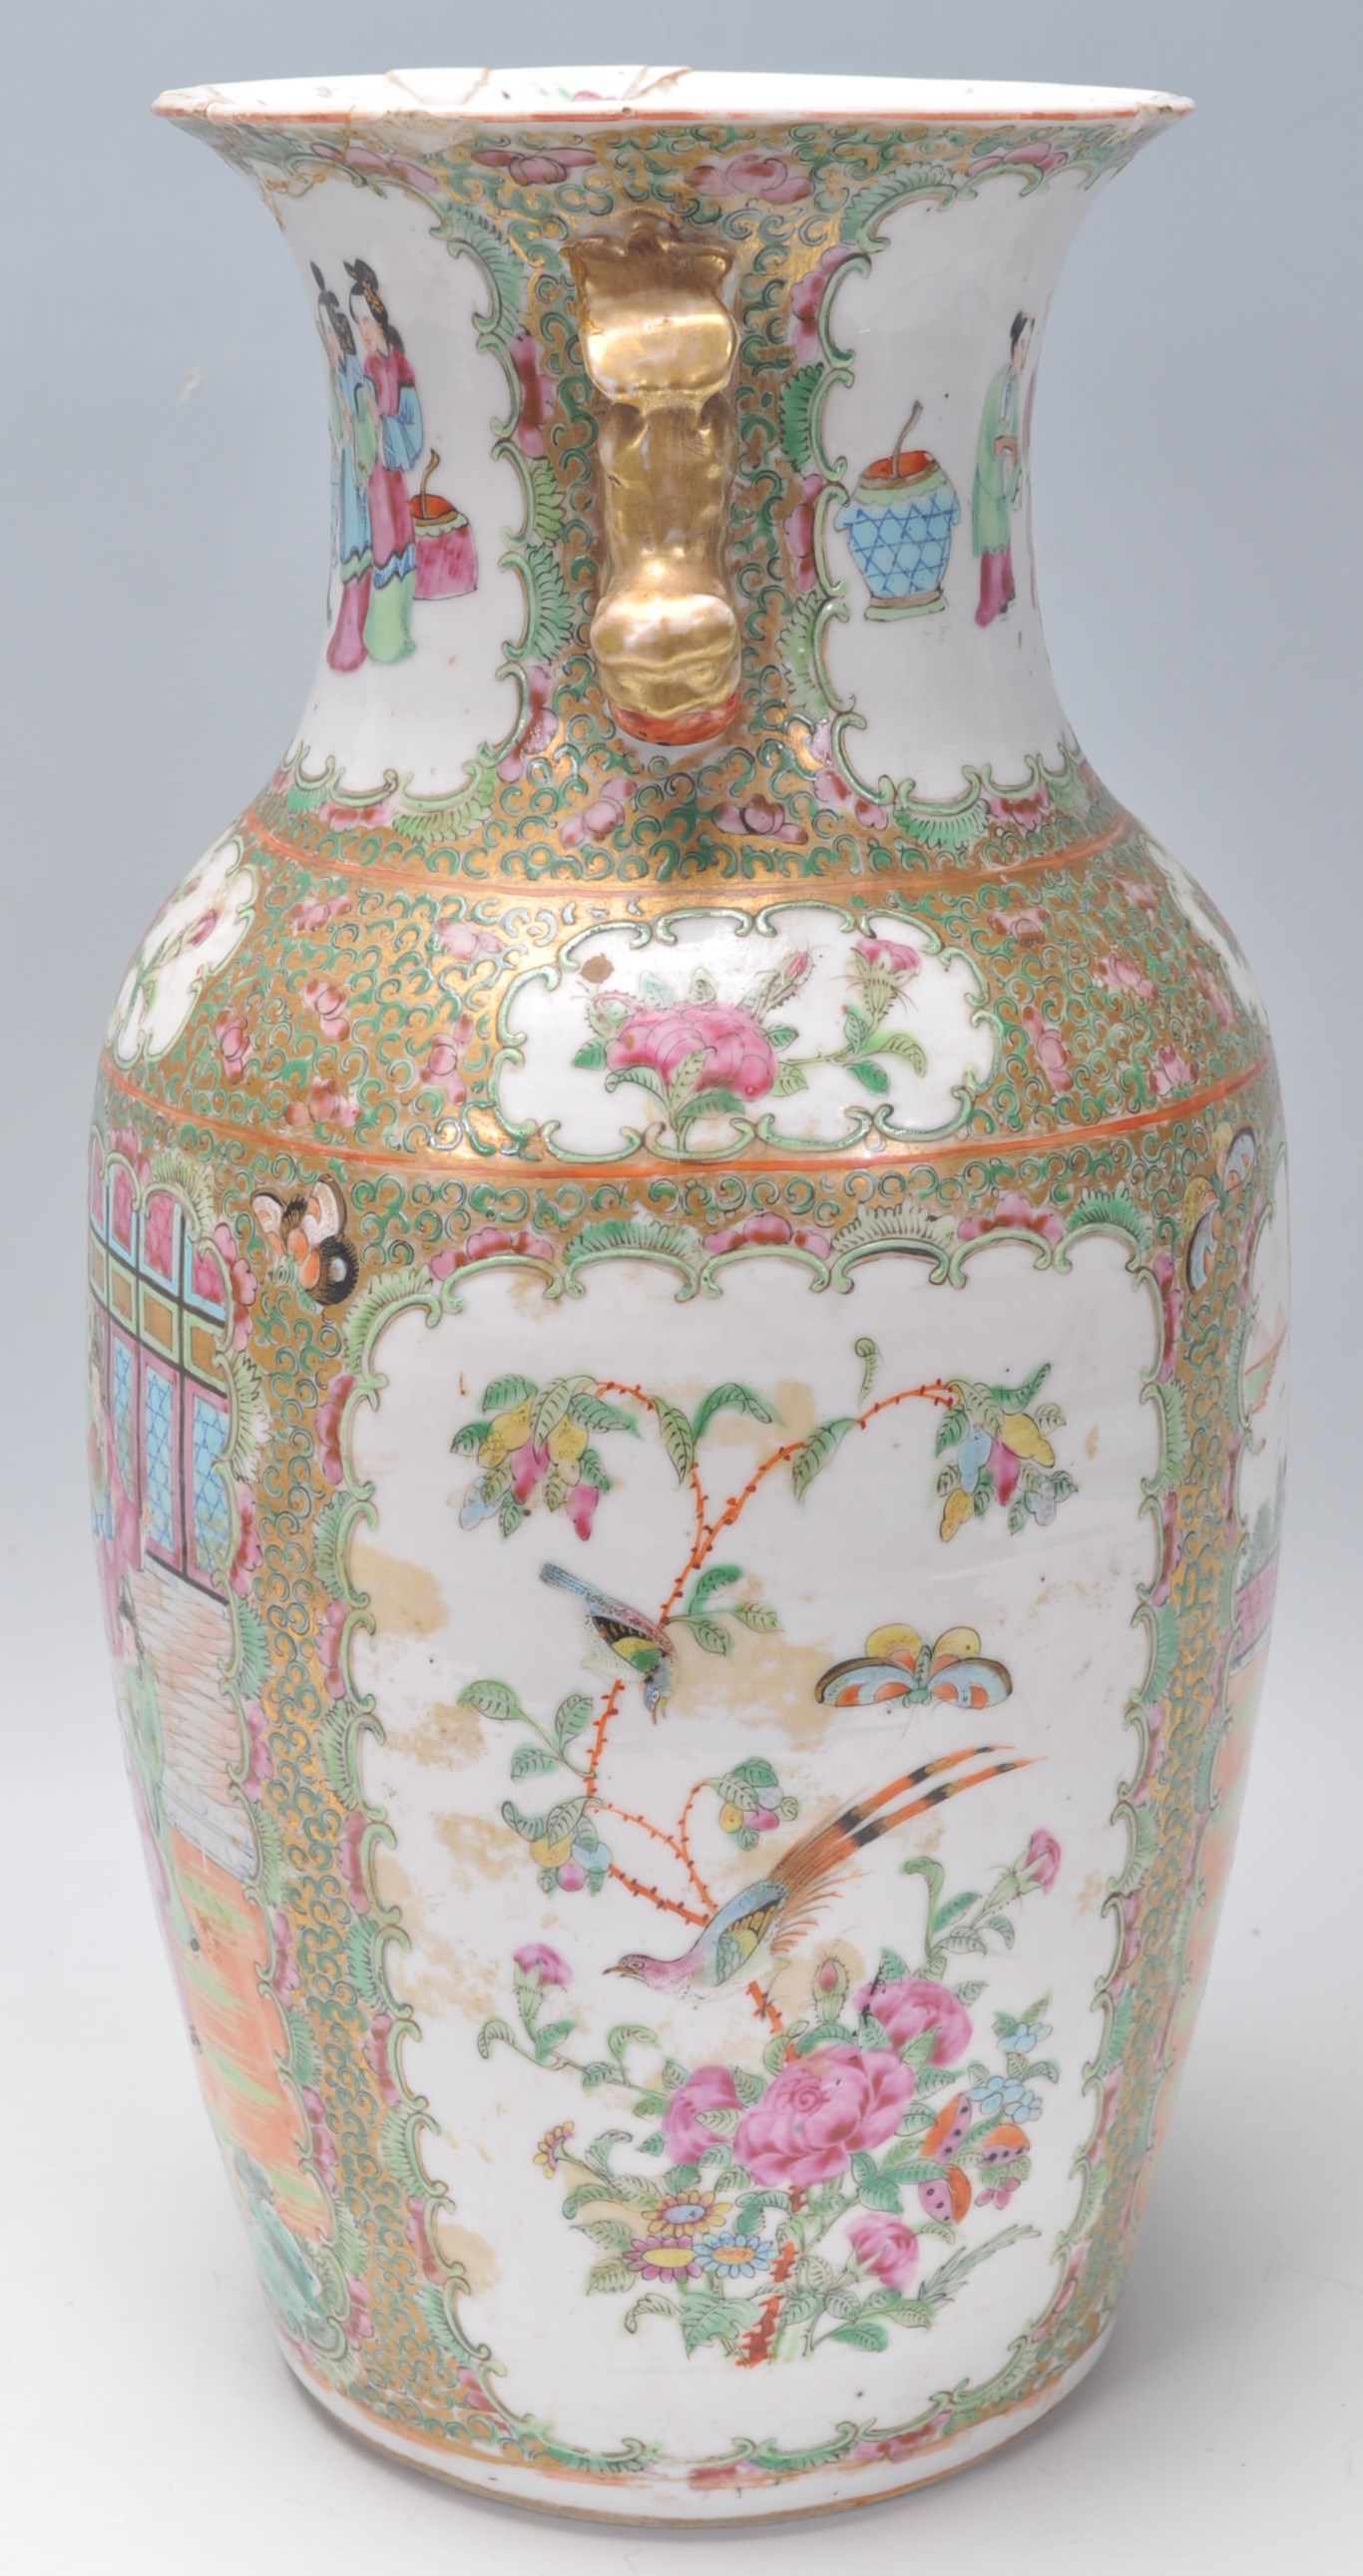 A 19th Century Chinese Cantonese famille rose vase with handpainted scenes of people, birds and - Image 7 of 10